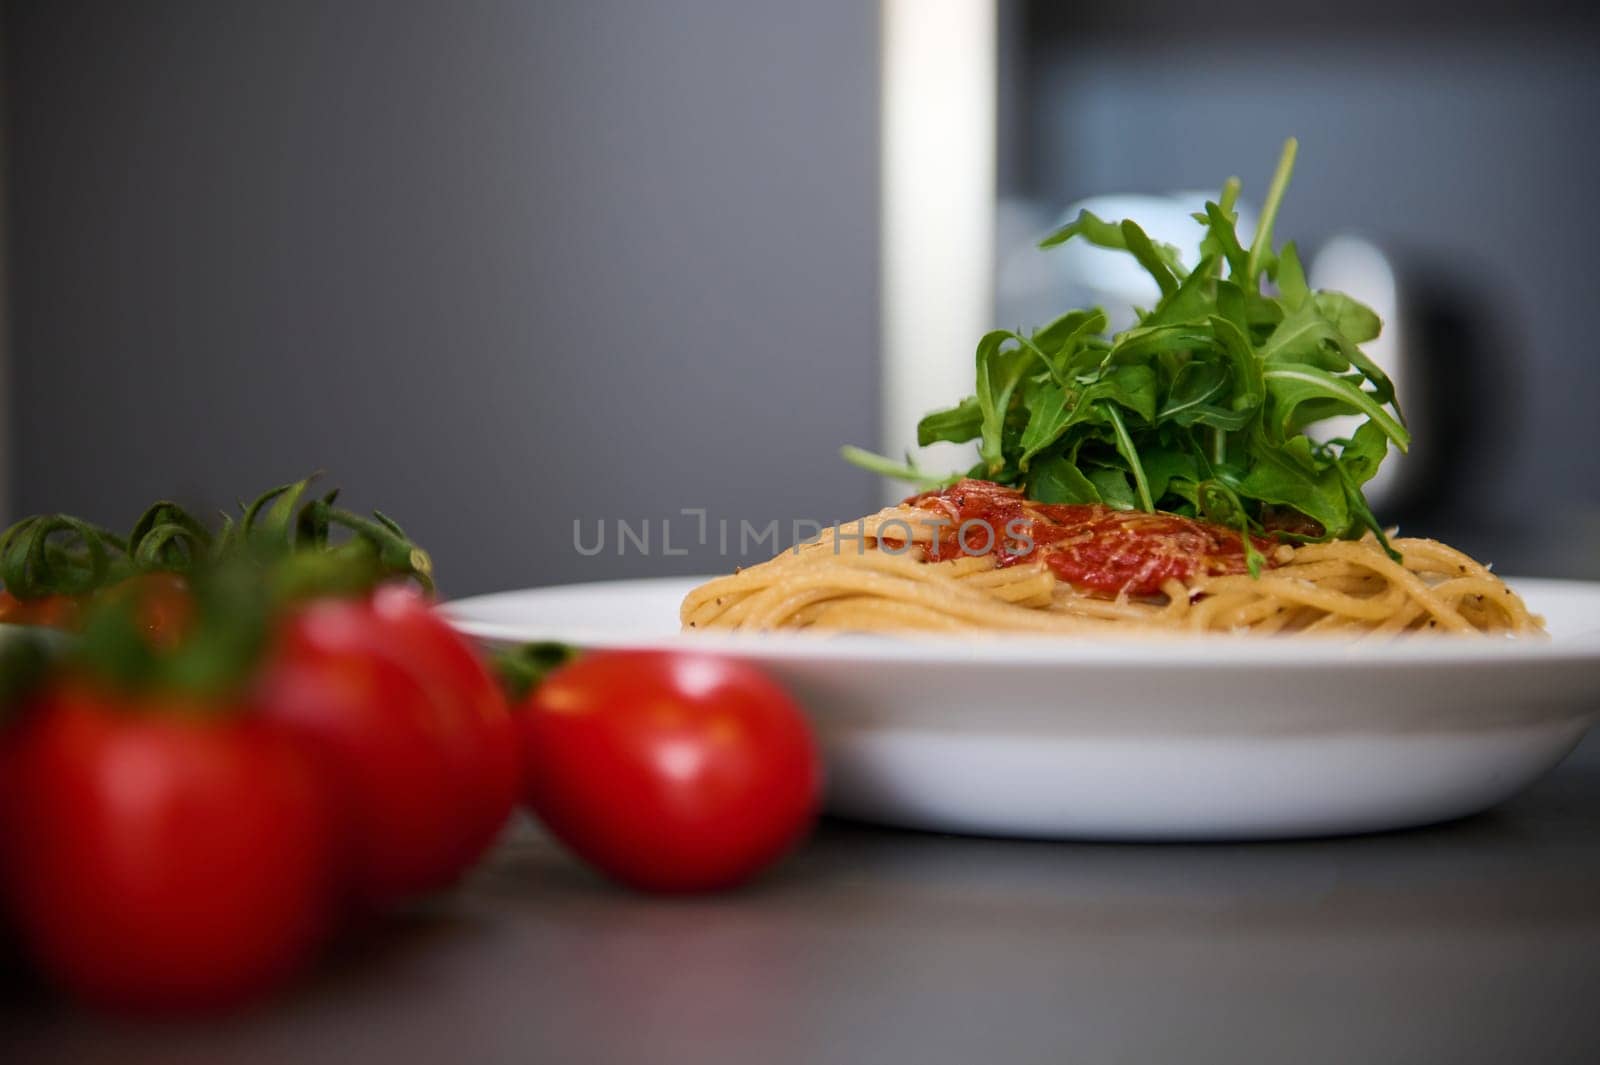 Italian pasta capellini with tomato sauce and basil green arugula leaves on white plates near a bunch of red cherry tomato on blurred foreground. Italian cuisine, culture and traditions. Epicure.